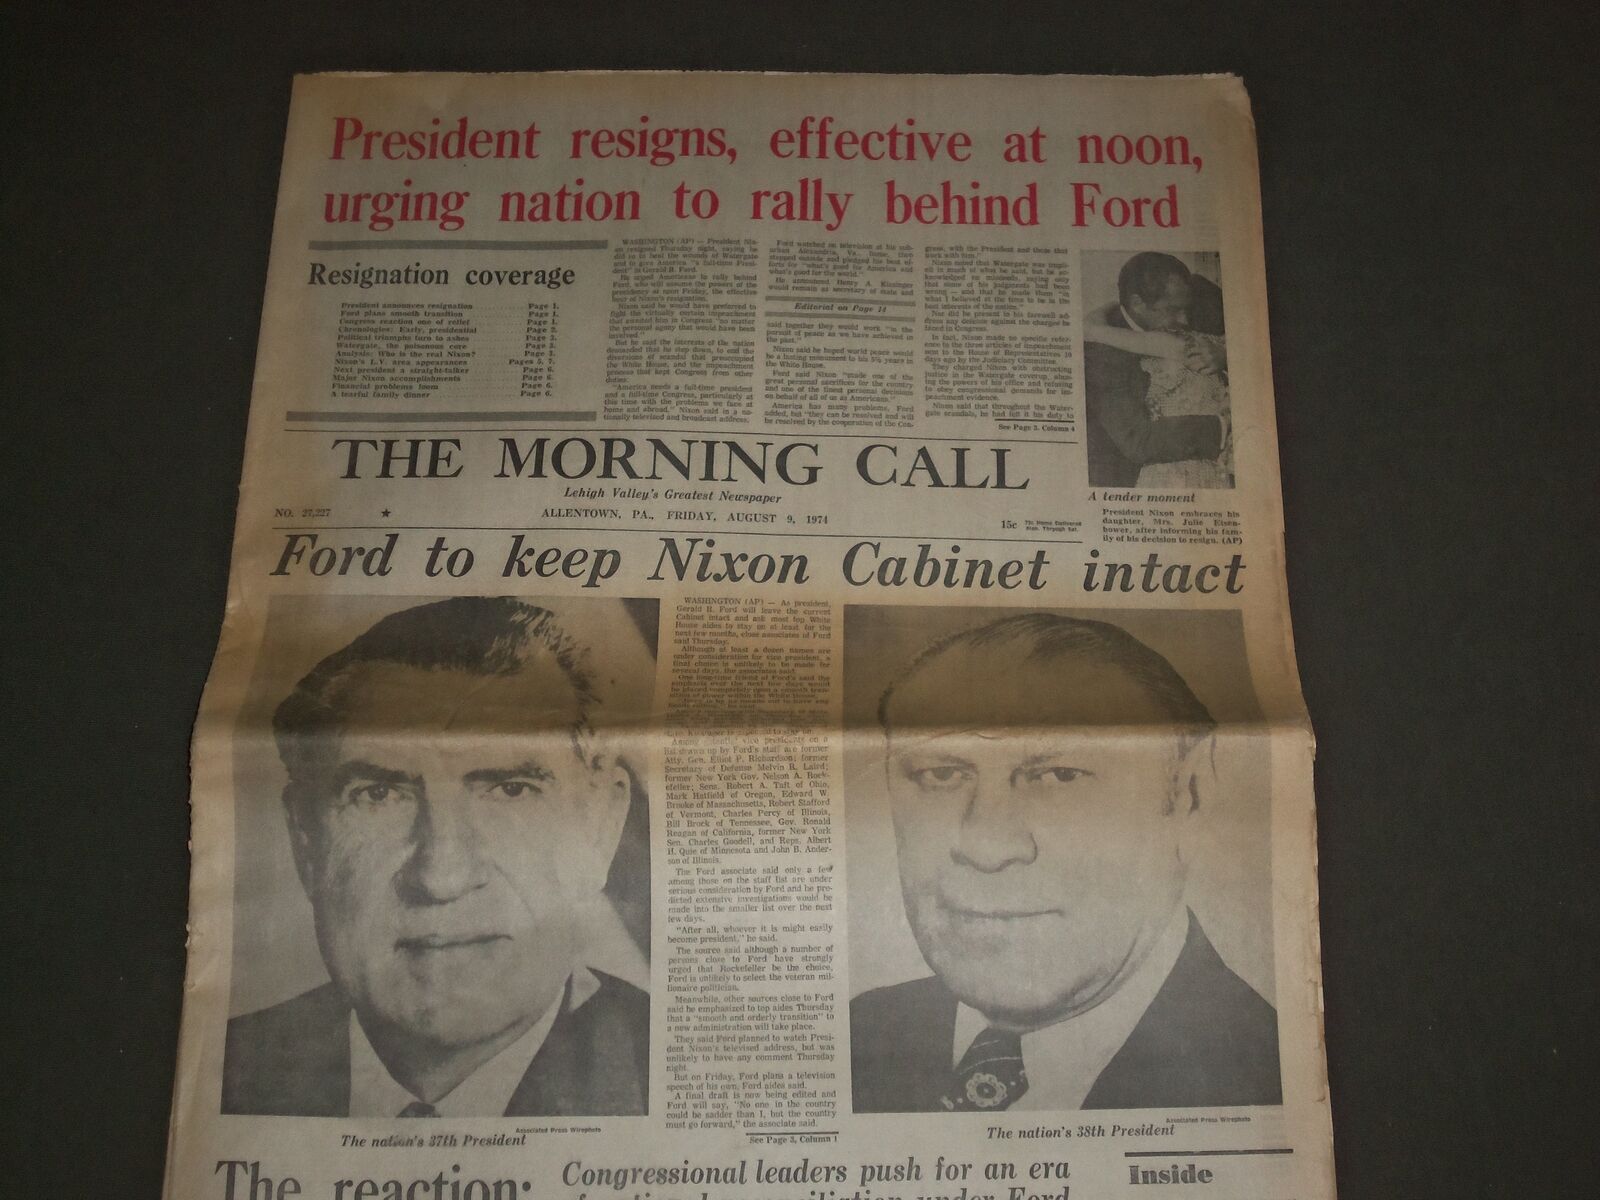 1974 AUG 9 LEHIGH VALLEY THE MORNING CALL - FORD TO KEEP NIXON CABINET- NP 2963